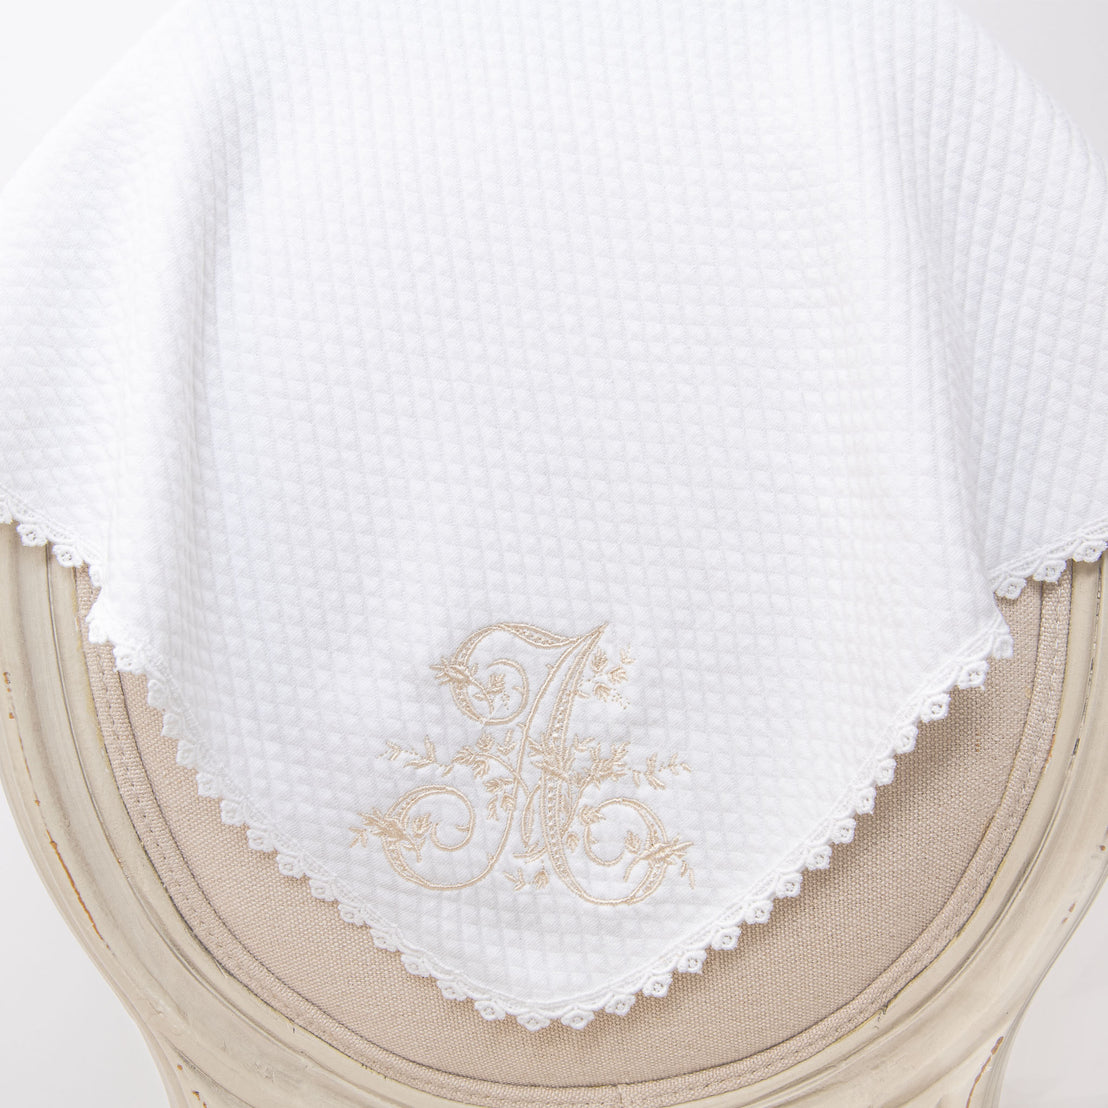 A white embroidered Initial Blanket with a detailed gold initial displayed on an elegant wooden chair.